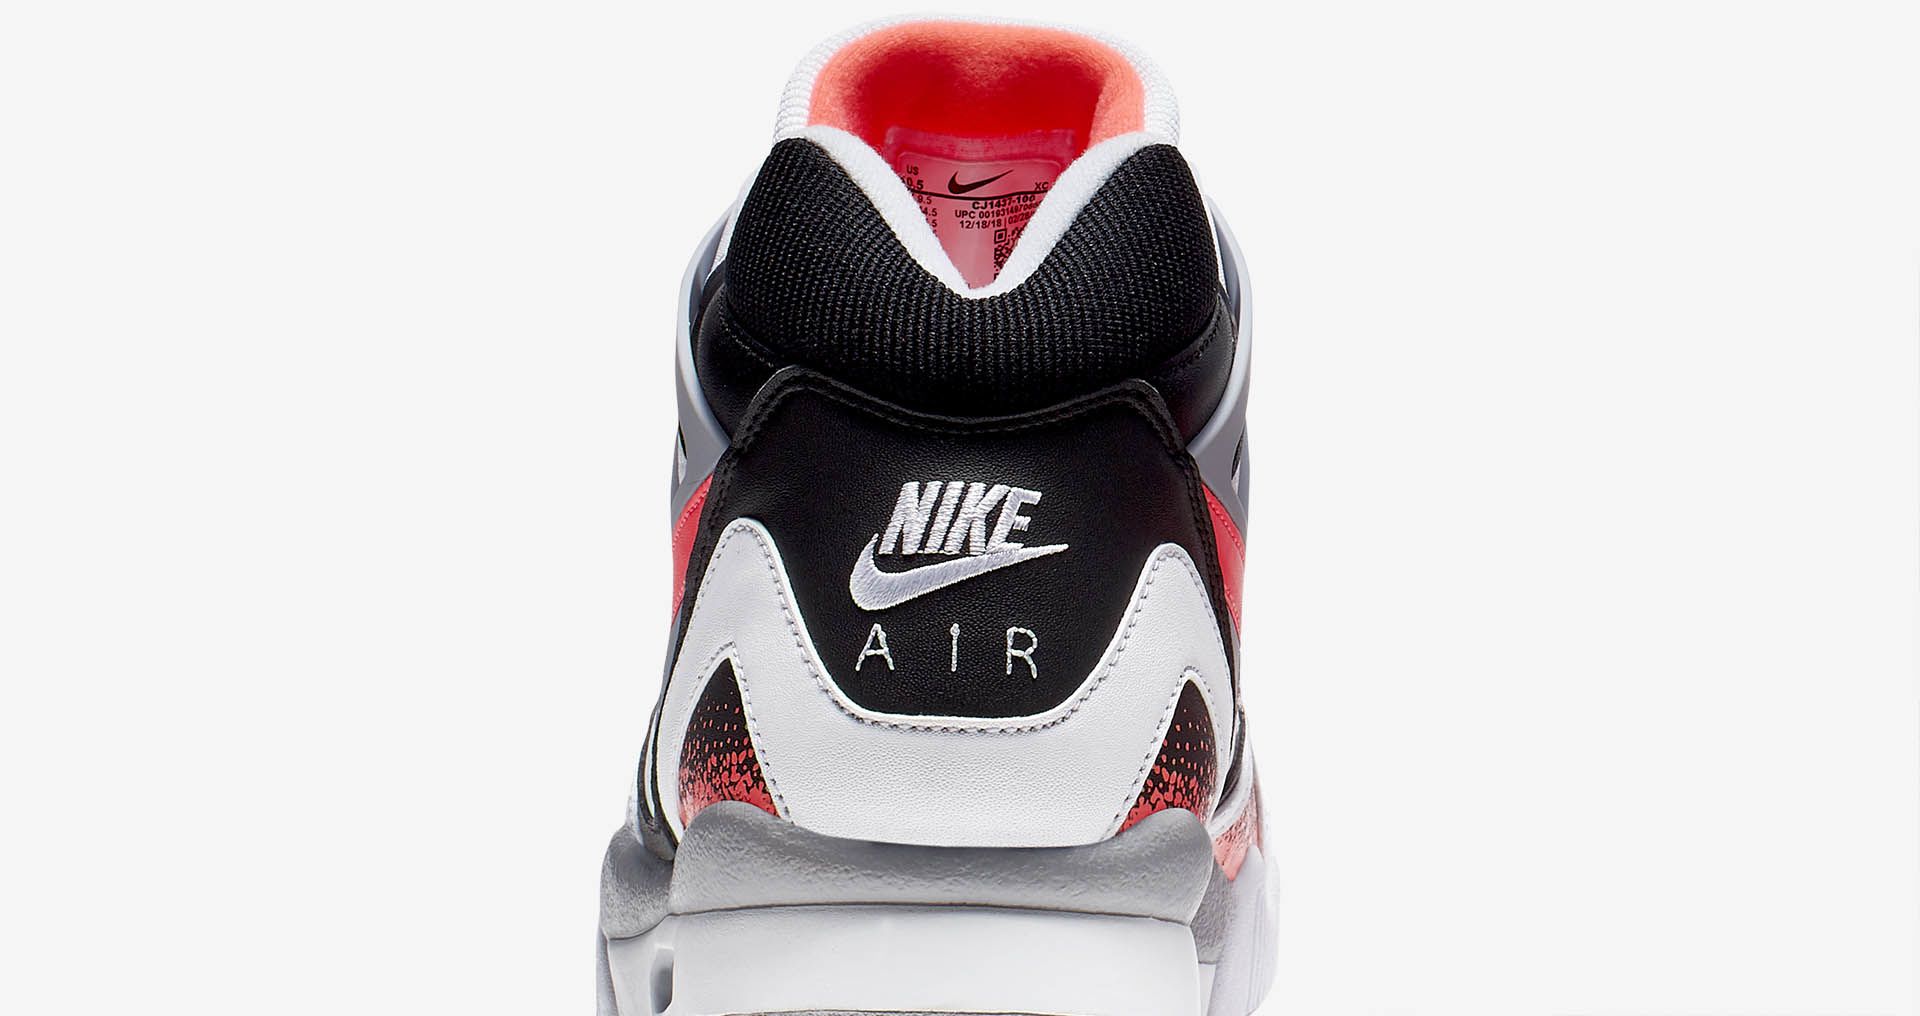 Nike Air Tech Challenge II 'Hot Lava' Release Date. Nike SNKRS